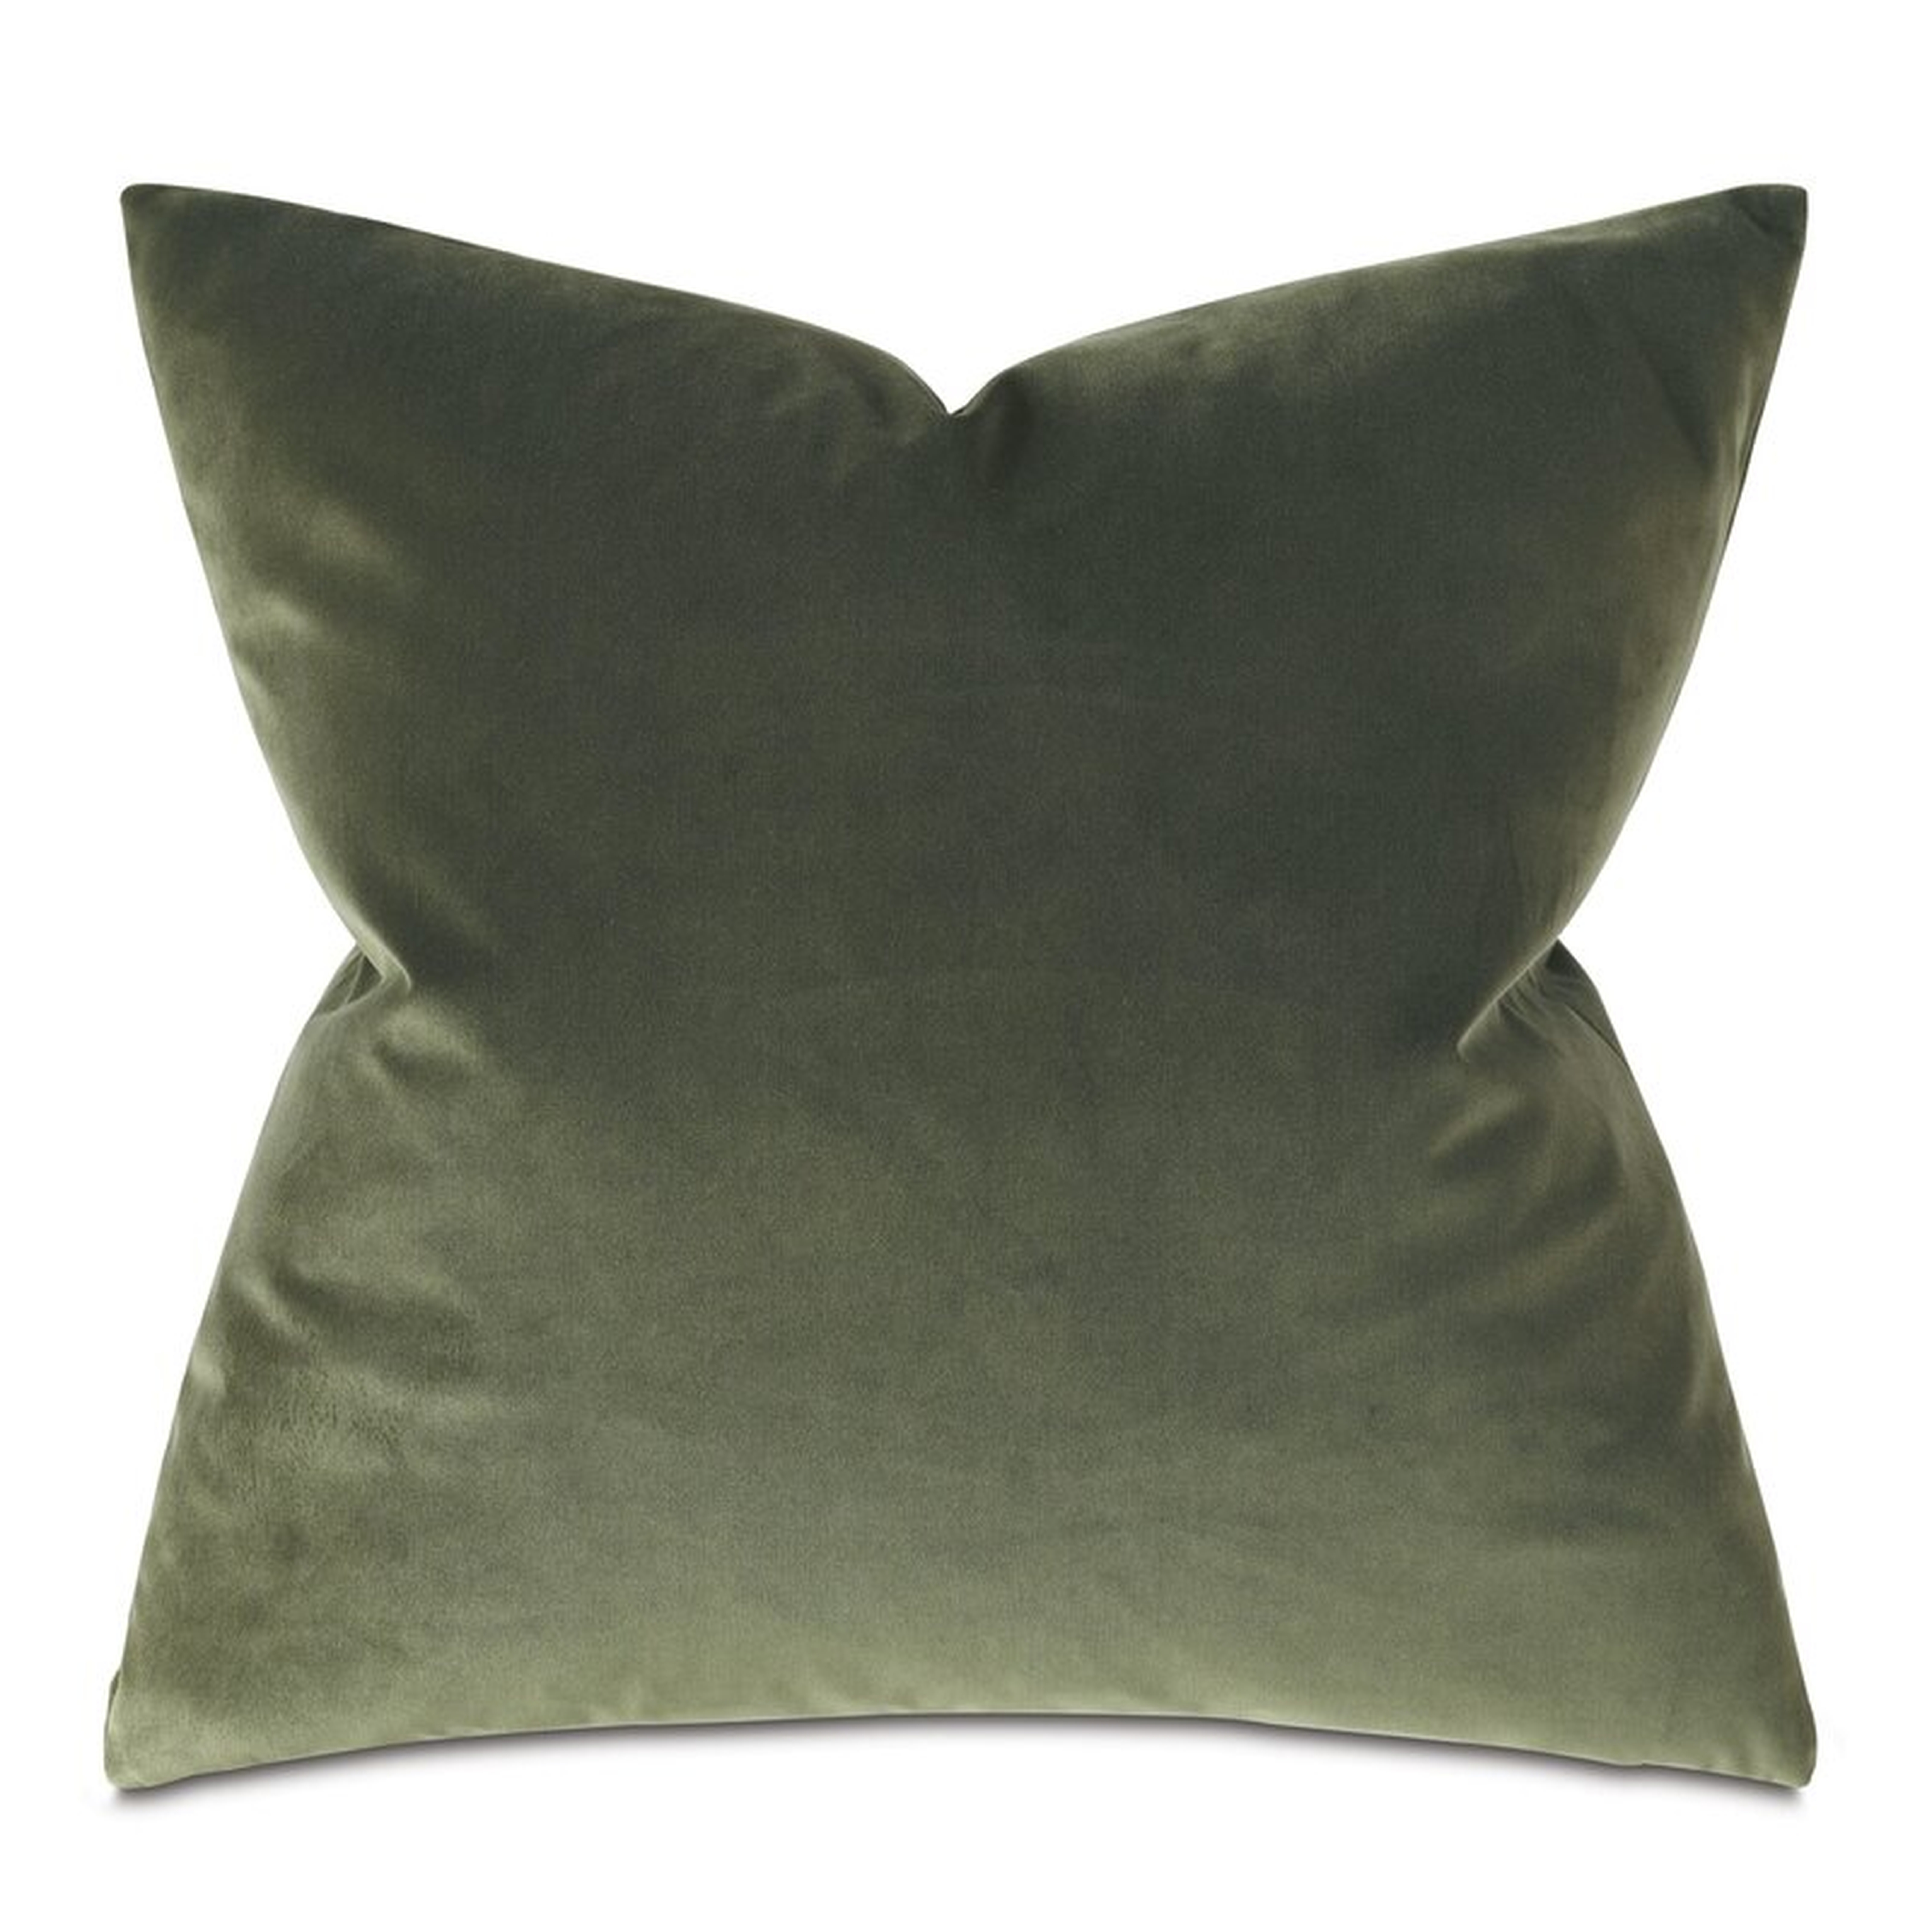 Eastern Accents Charlie Throw Pillow - Perigold